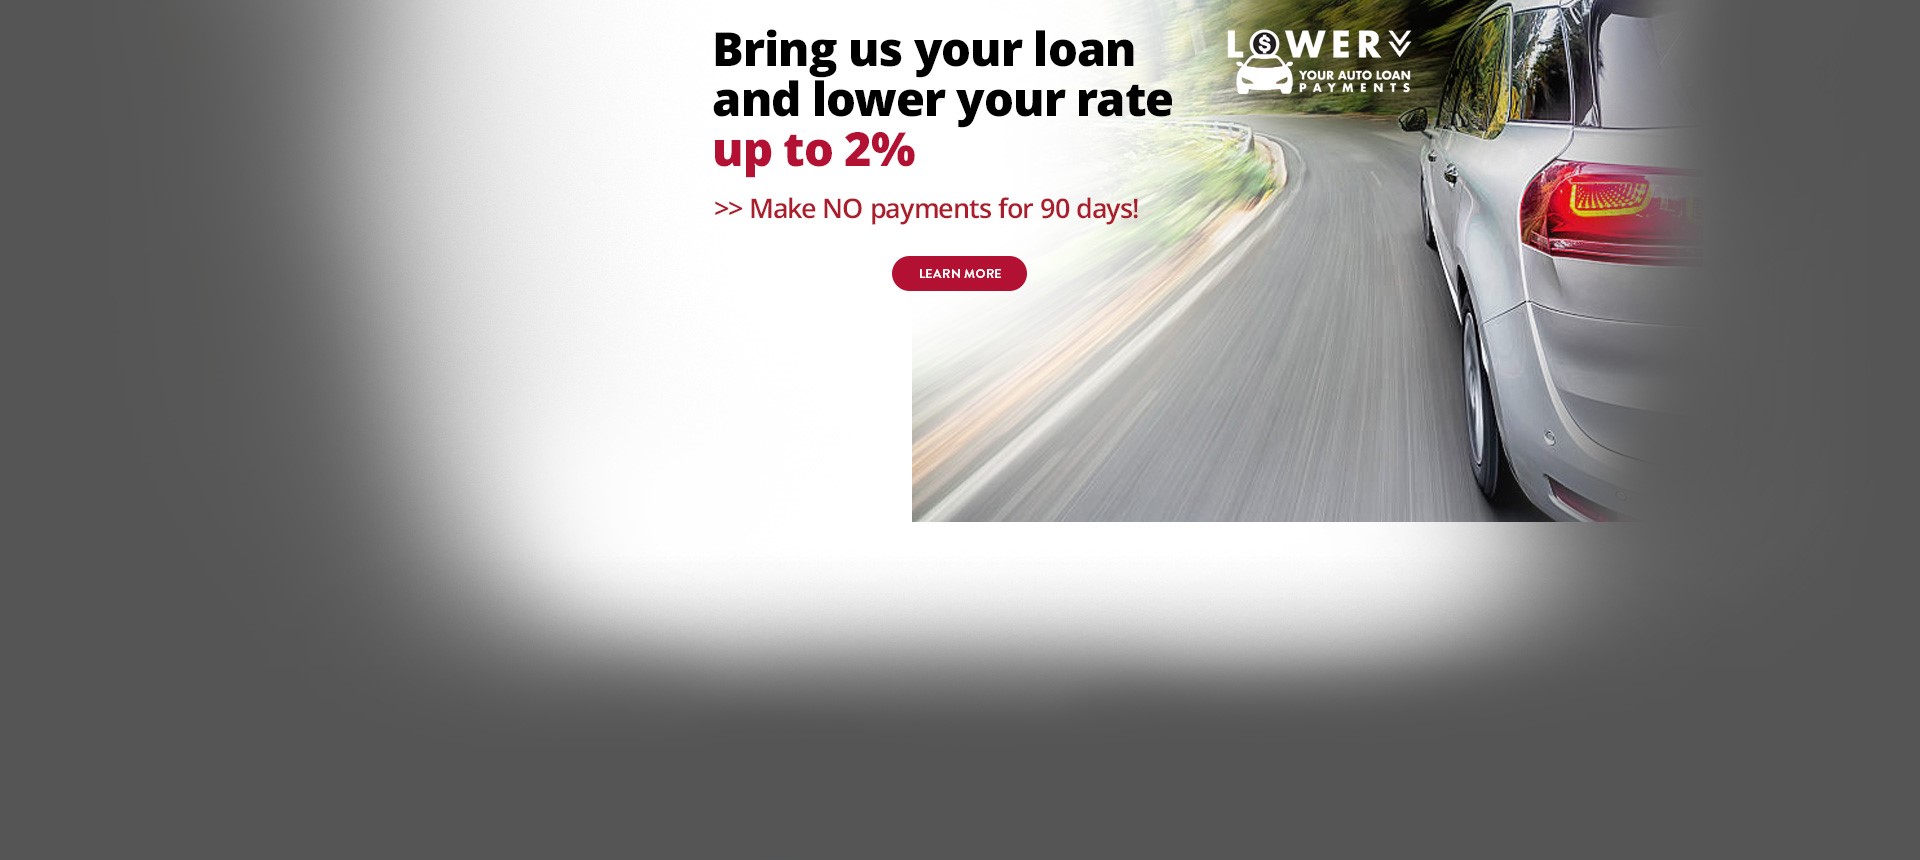 Lower your auto loan rate by 2% - now through 12/31/22!